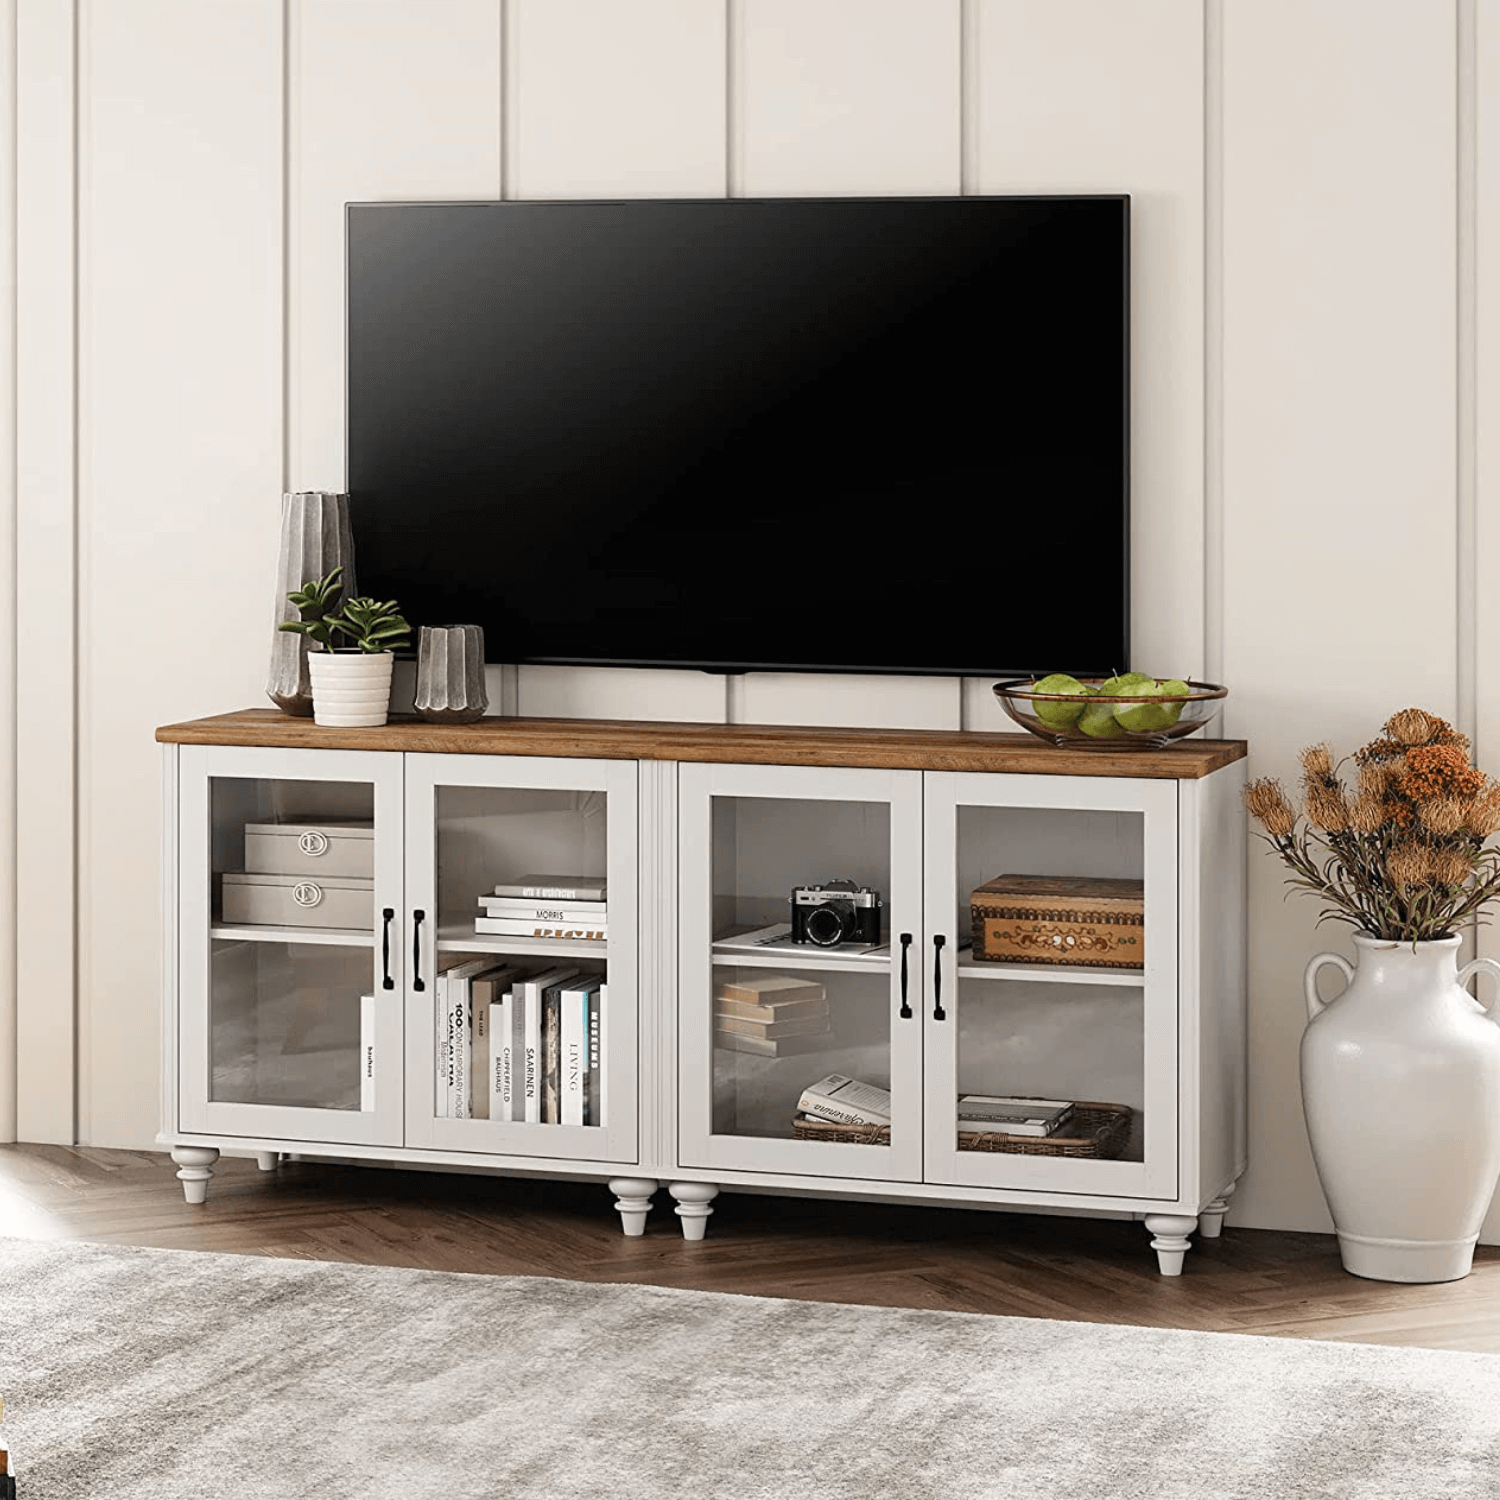 WAMPAT 67.7" LED TV Stand for 75 Inch TV, 2-in-1 Kitchen Sideboard Buffet Cabinet with Glass Door for Dining Room, Off White